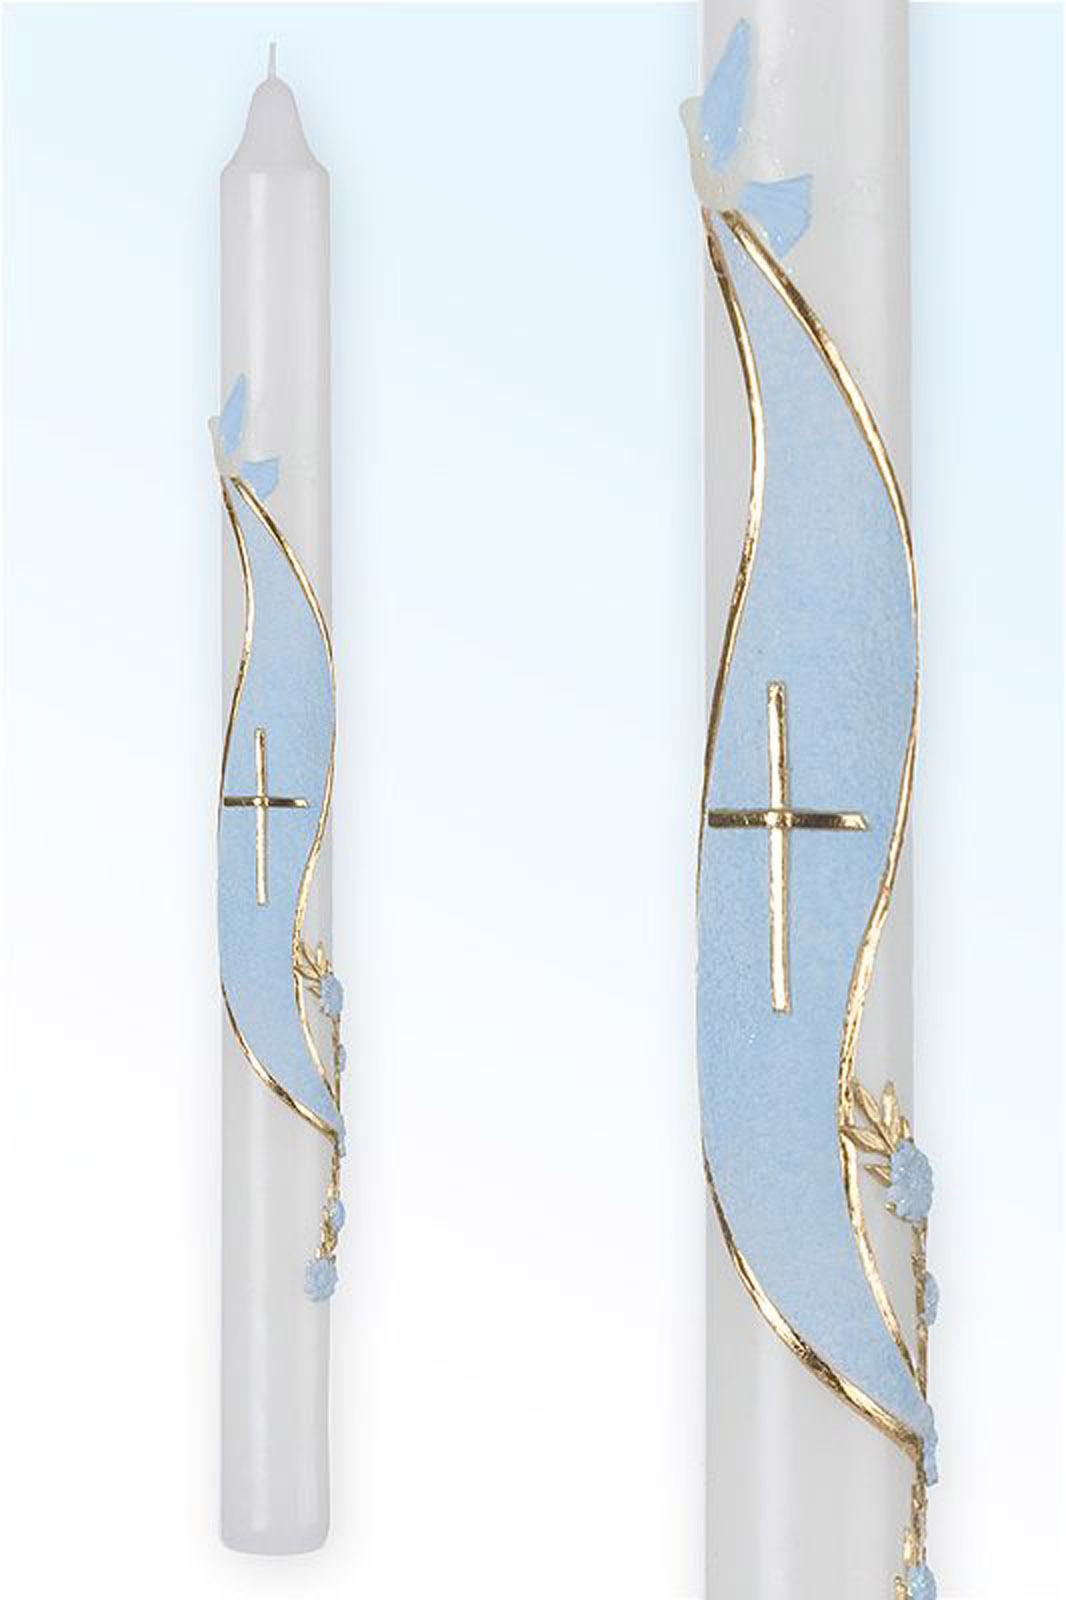 Two Baptism candles with cross on the blue background and the dove